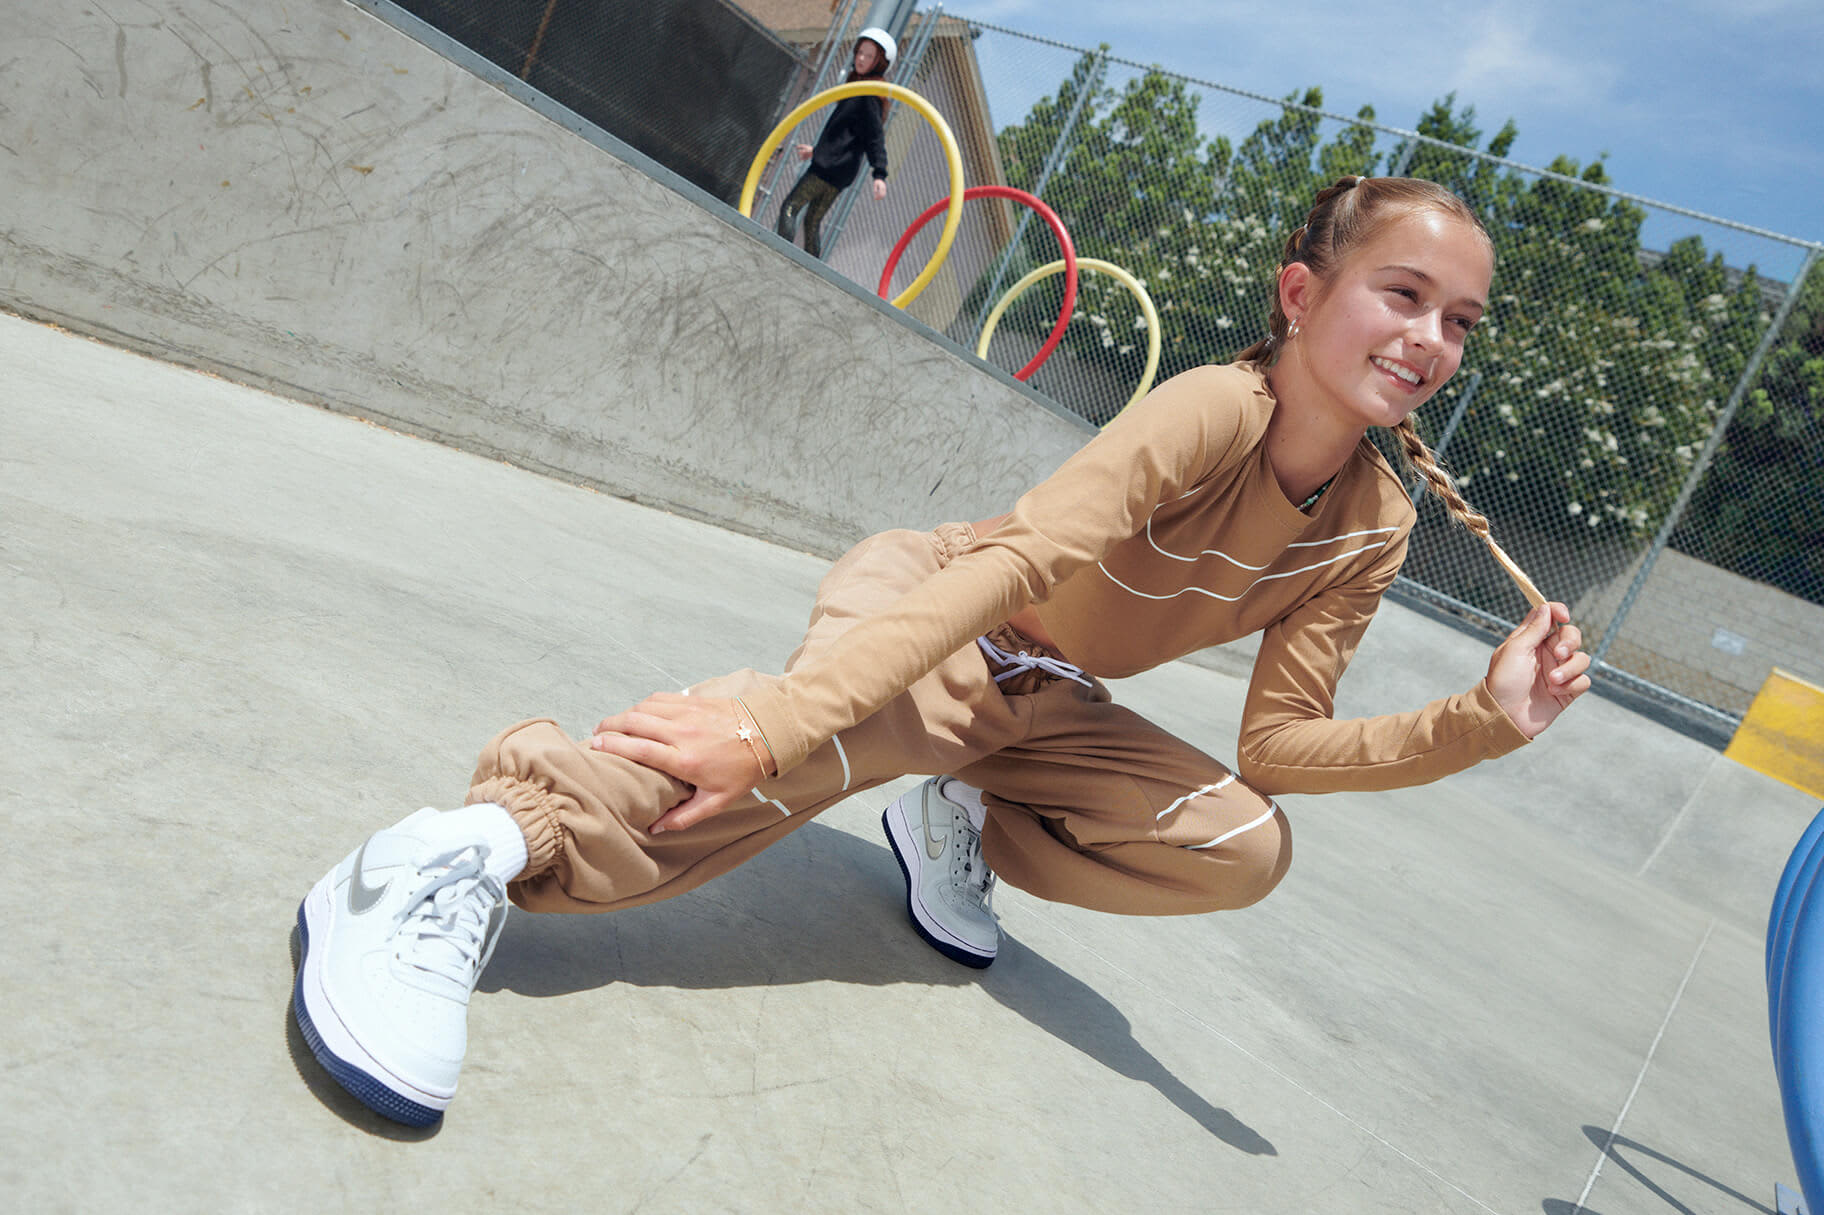 The Best Nike Tracksuit Bottoms for Girls